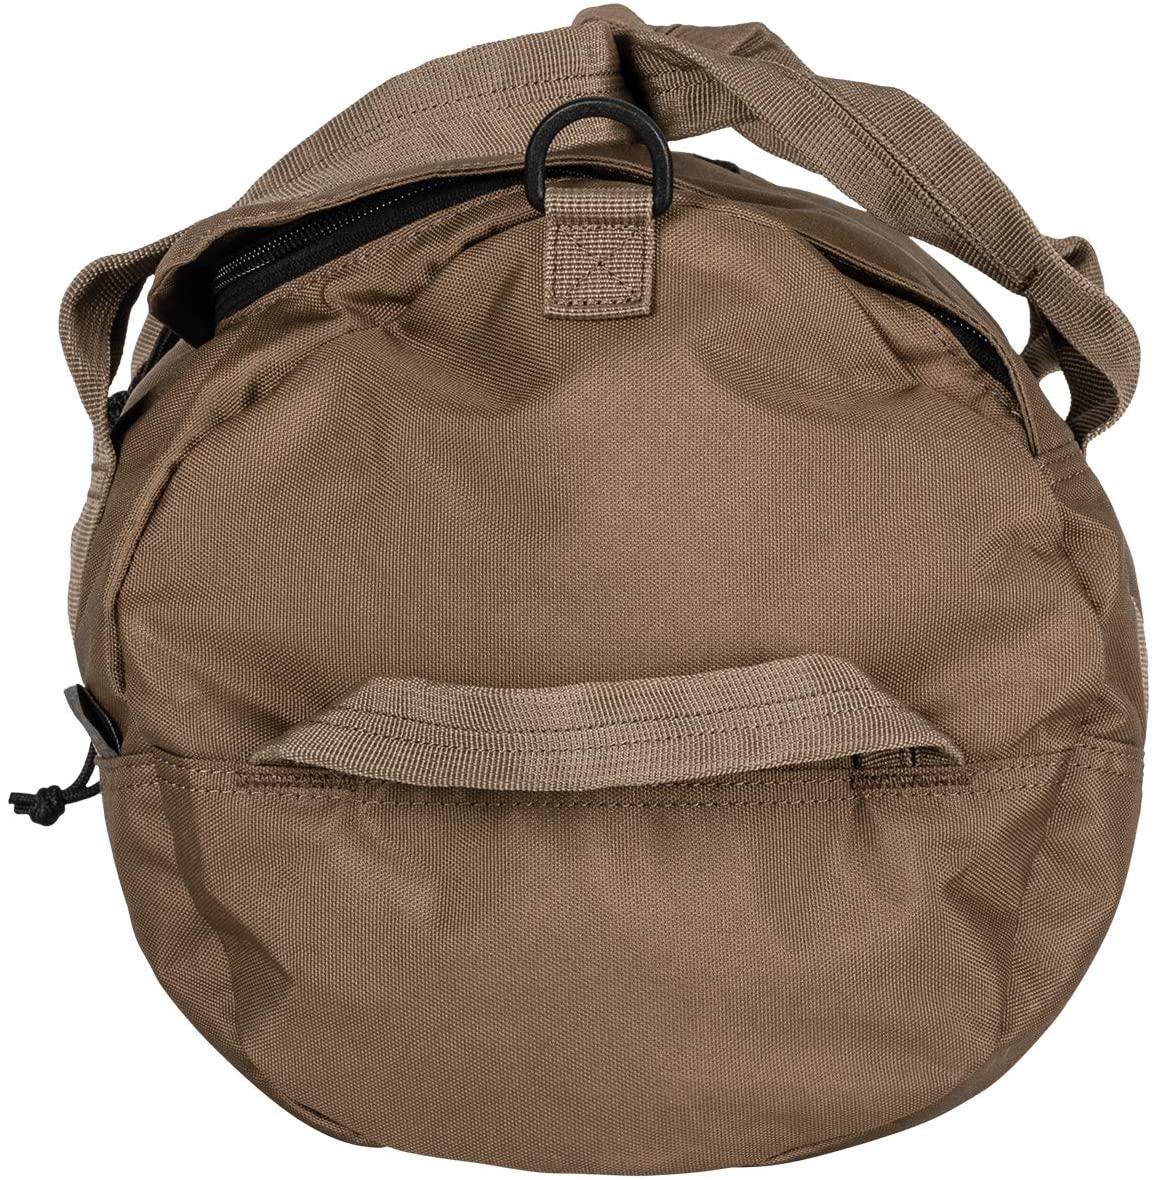 HD-2 Hunting and Tactical Duffle Bags2